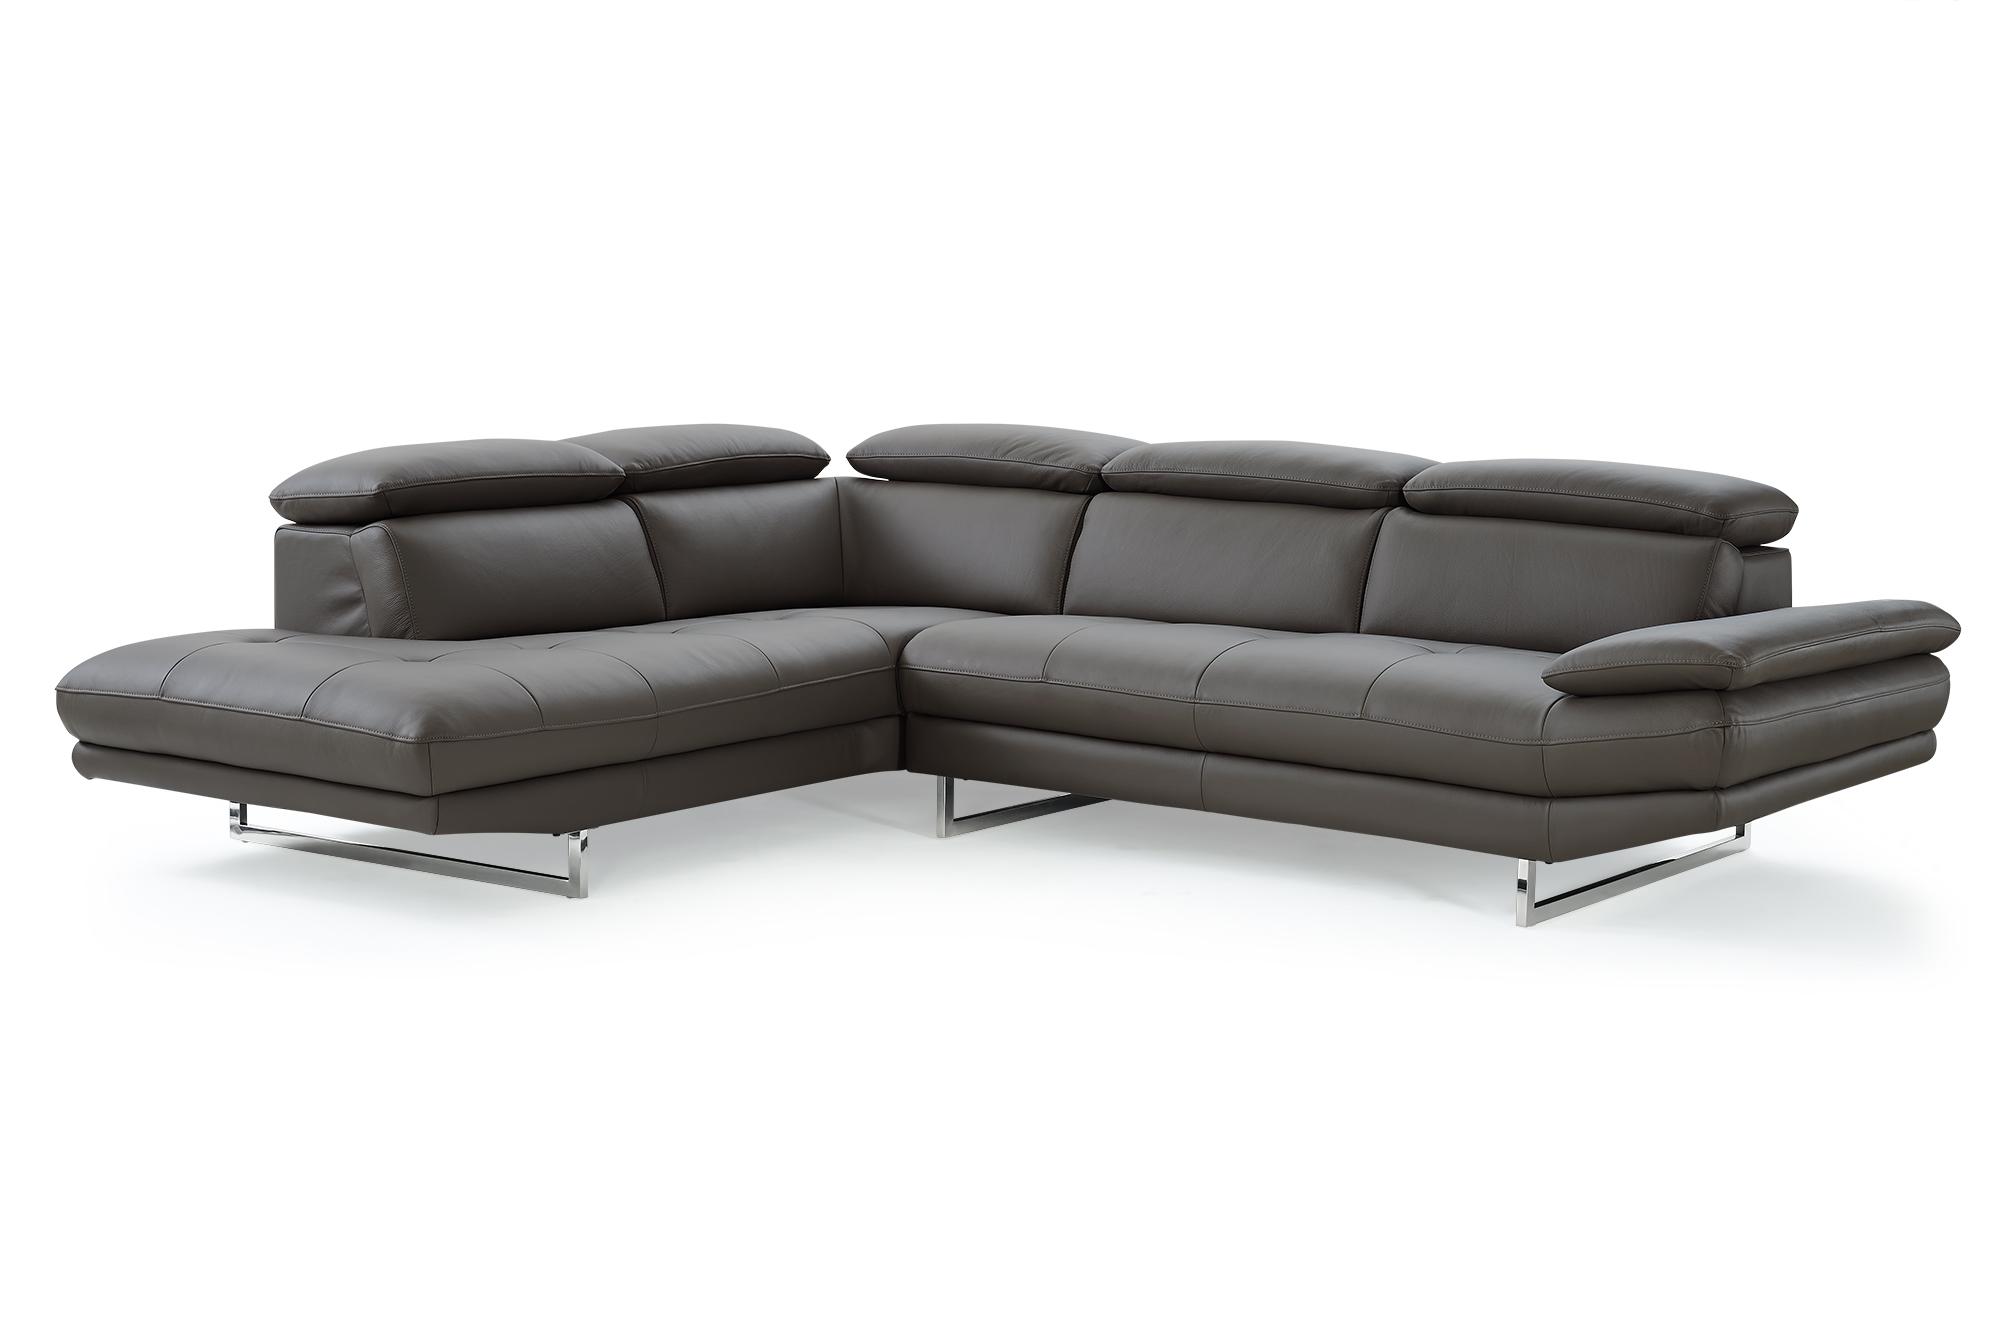 Modern Sectional SL1351L-DGRY Pandora SL1351L-DGRY in Dark Gray Top grain leather